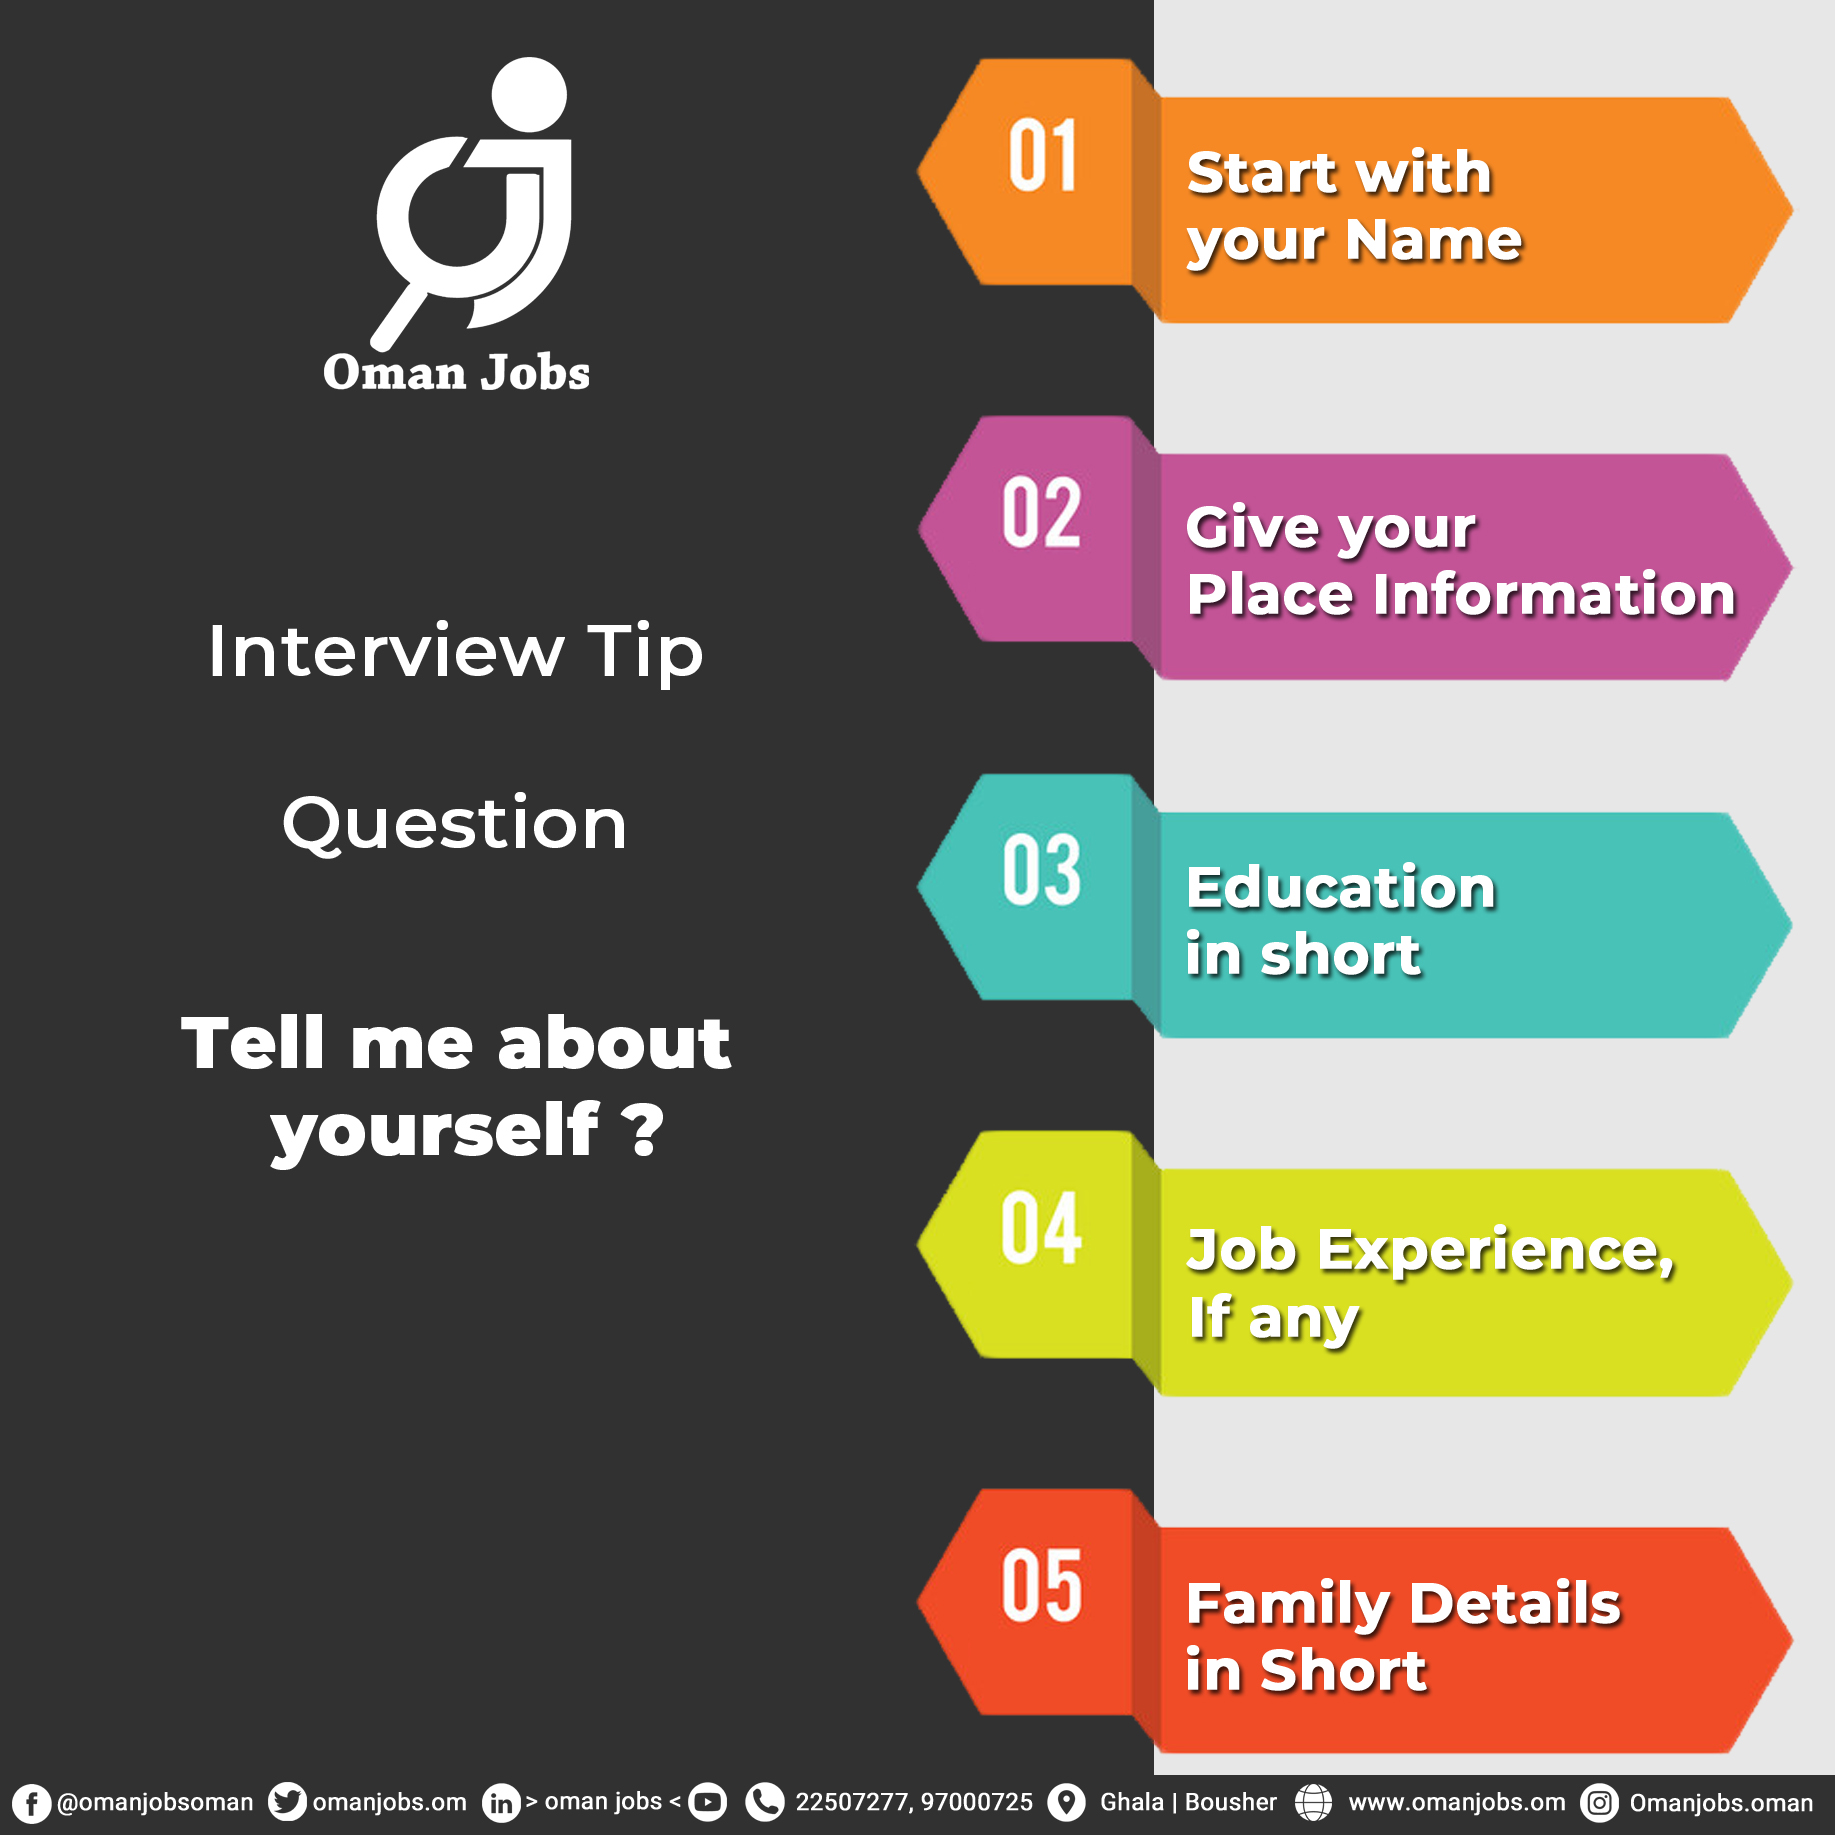 INTERVIEW TIP - TELL ME ABOUT YOURSELF